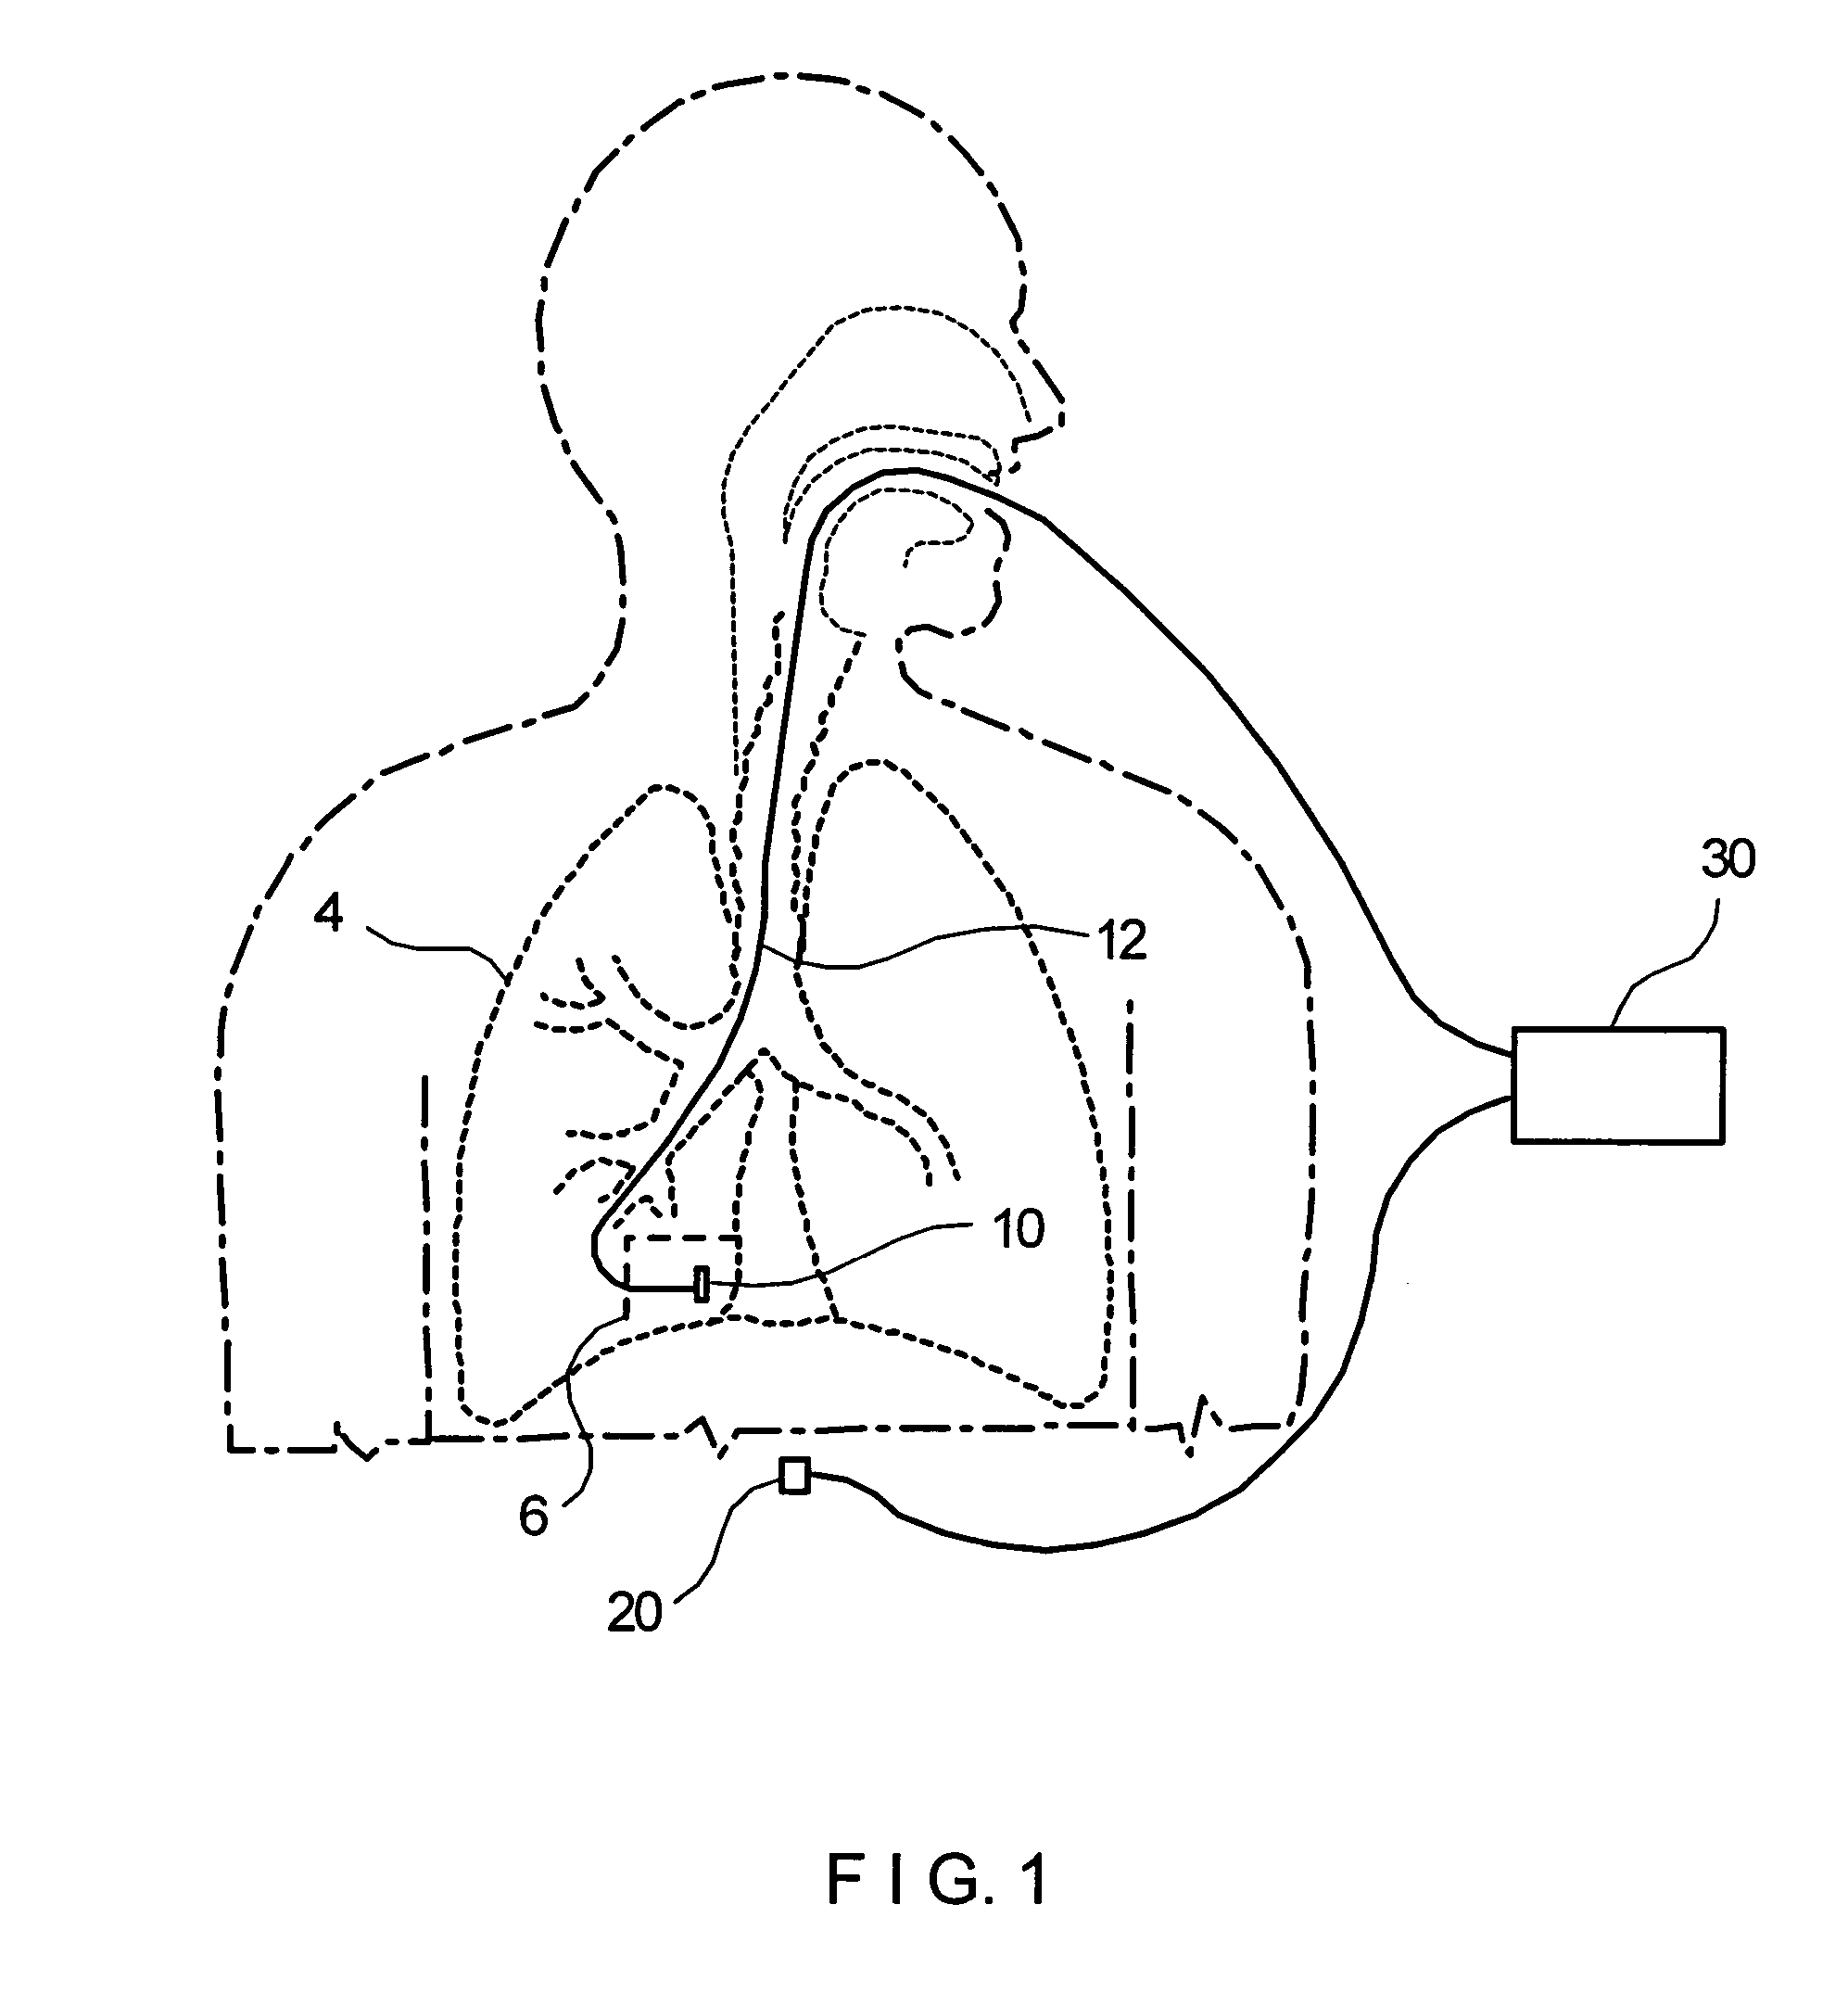 Devices and methods for tissue analysis